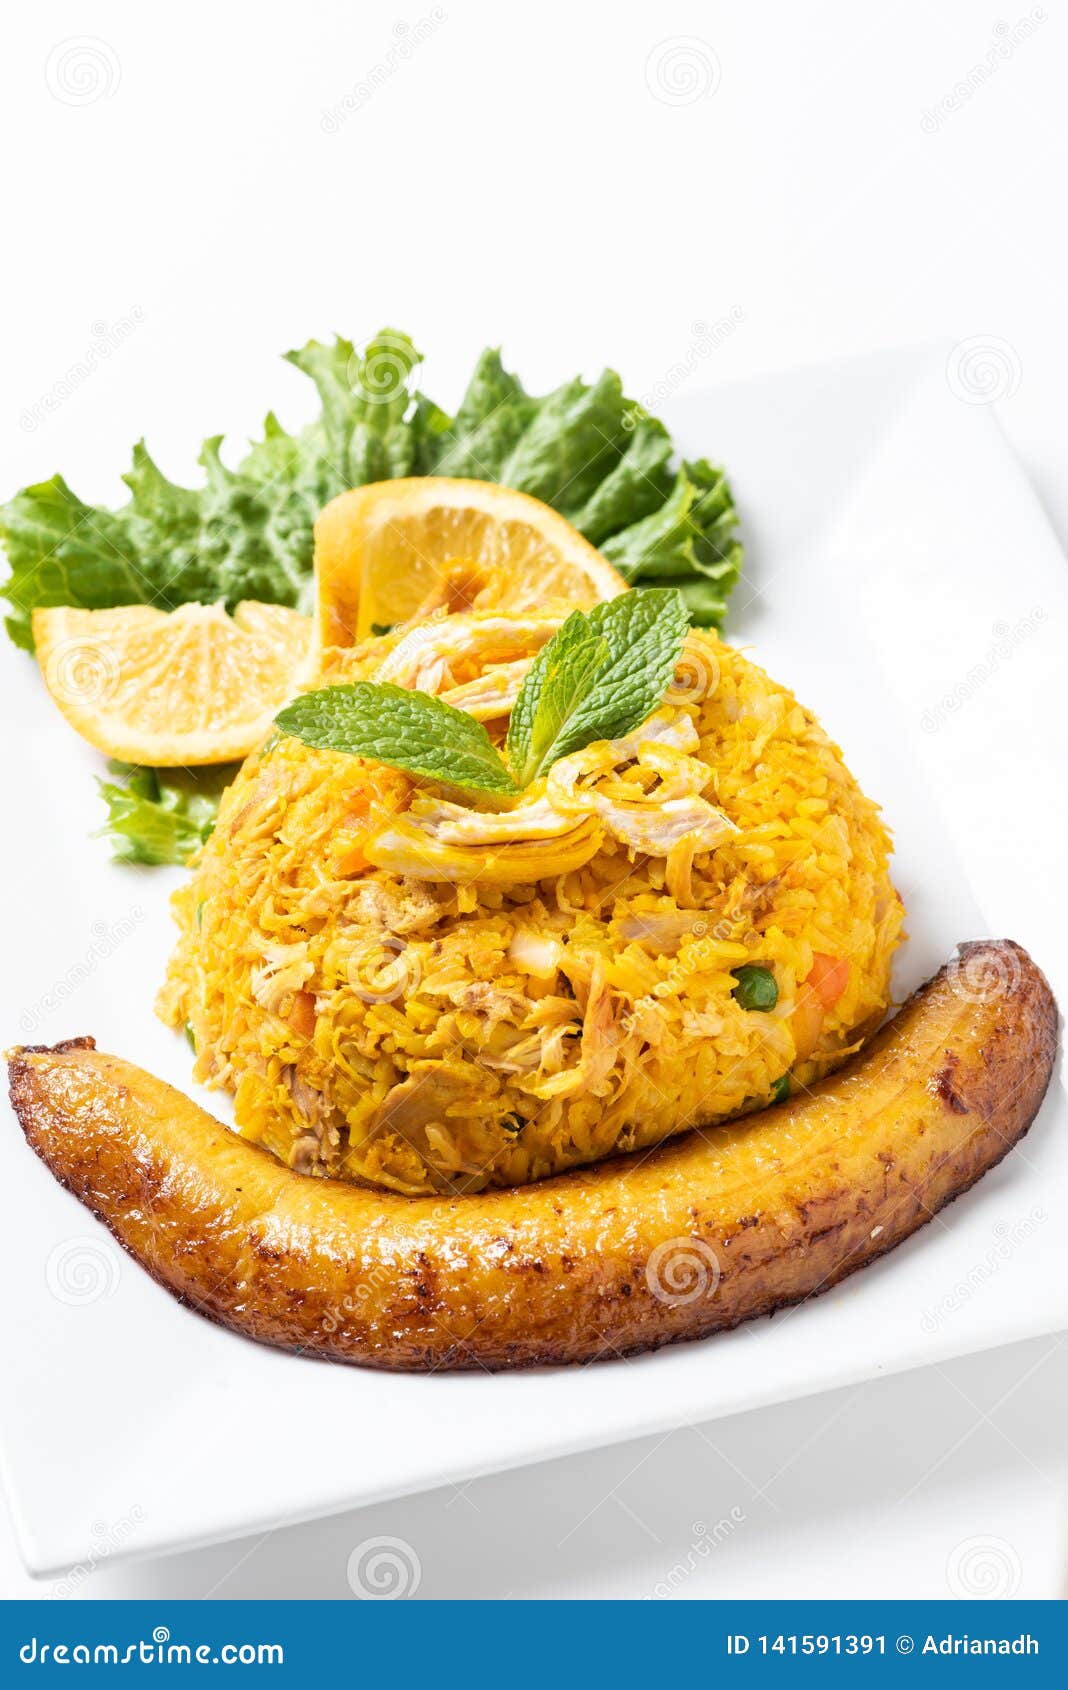 arroz con pollo colombiano colombian style rice with chicken meat